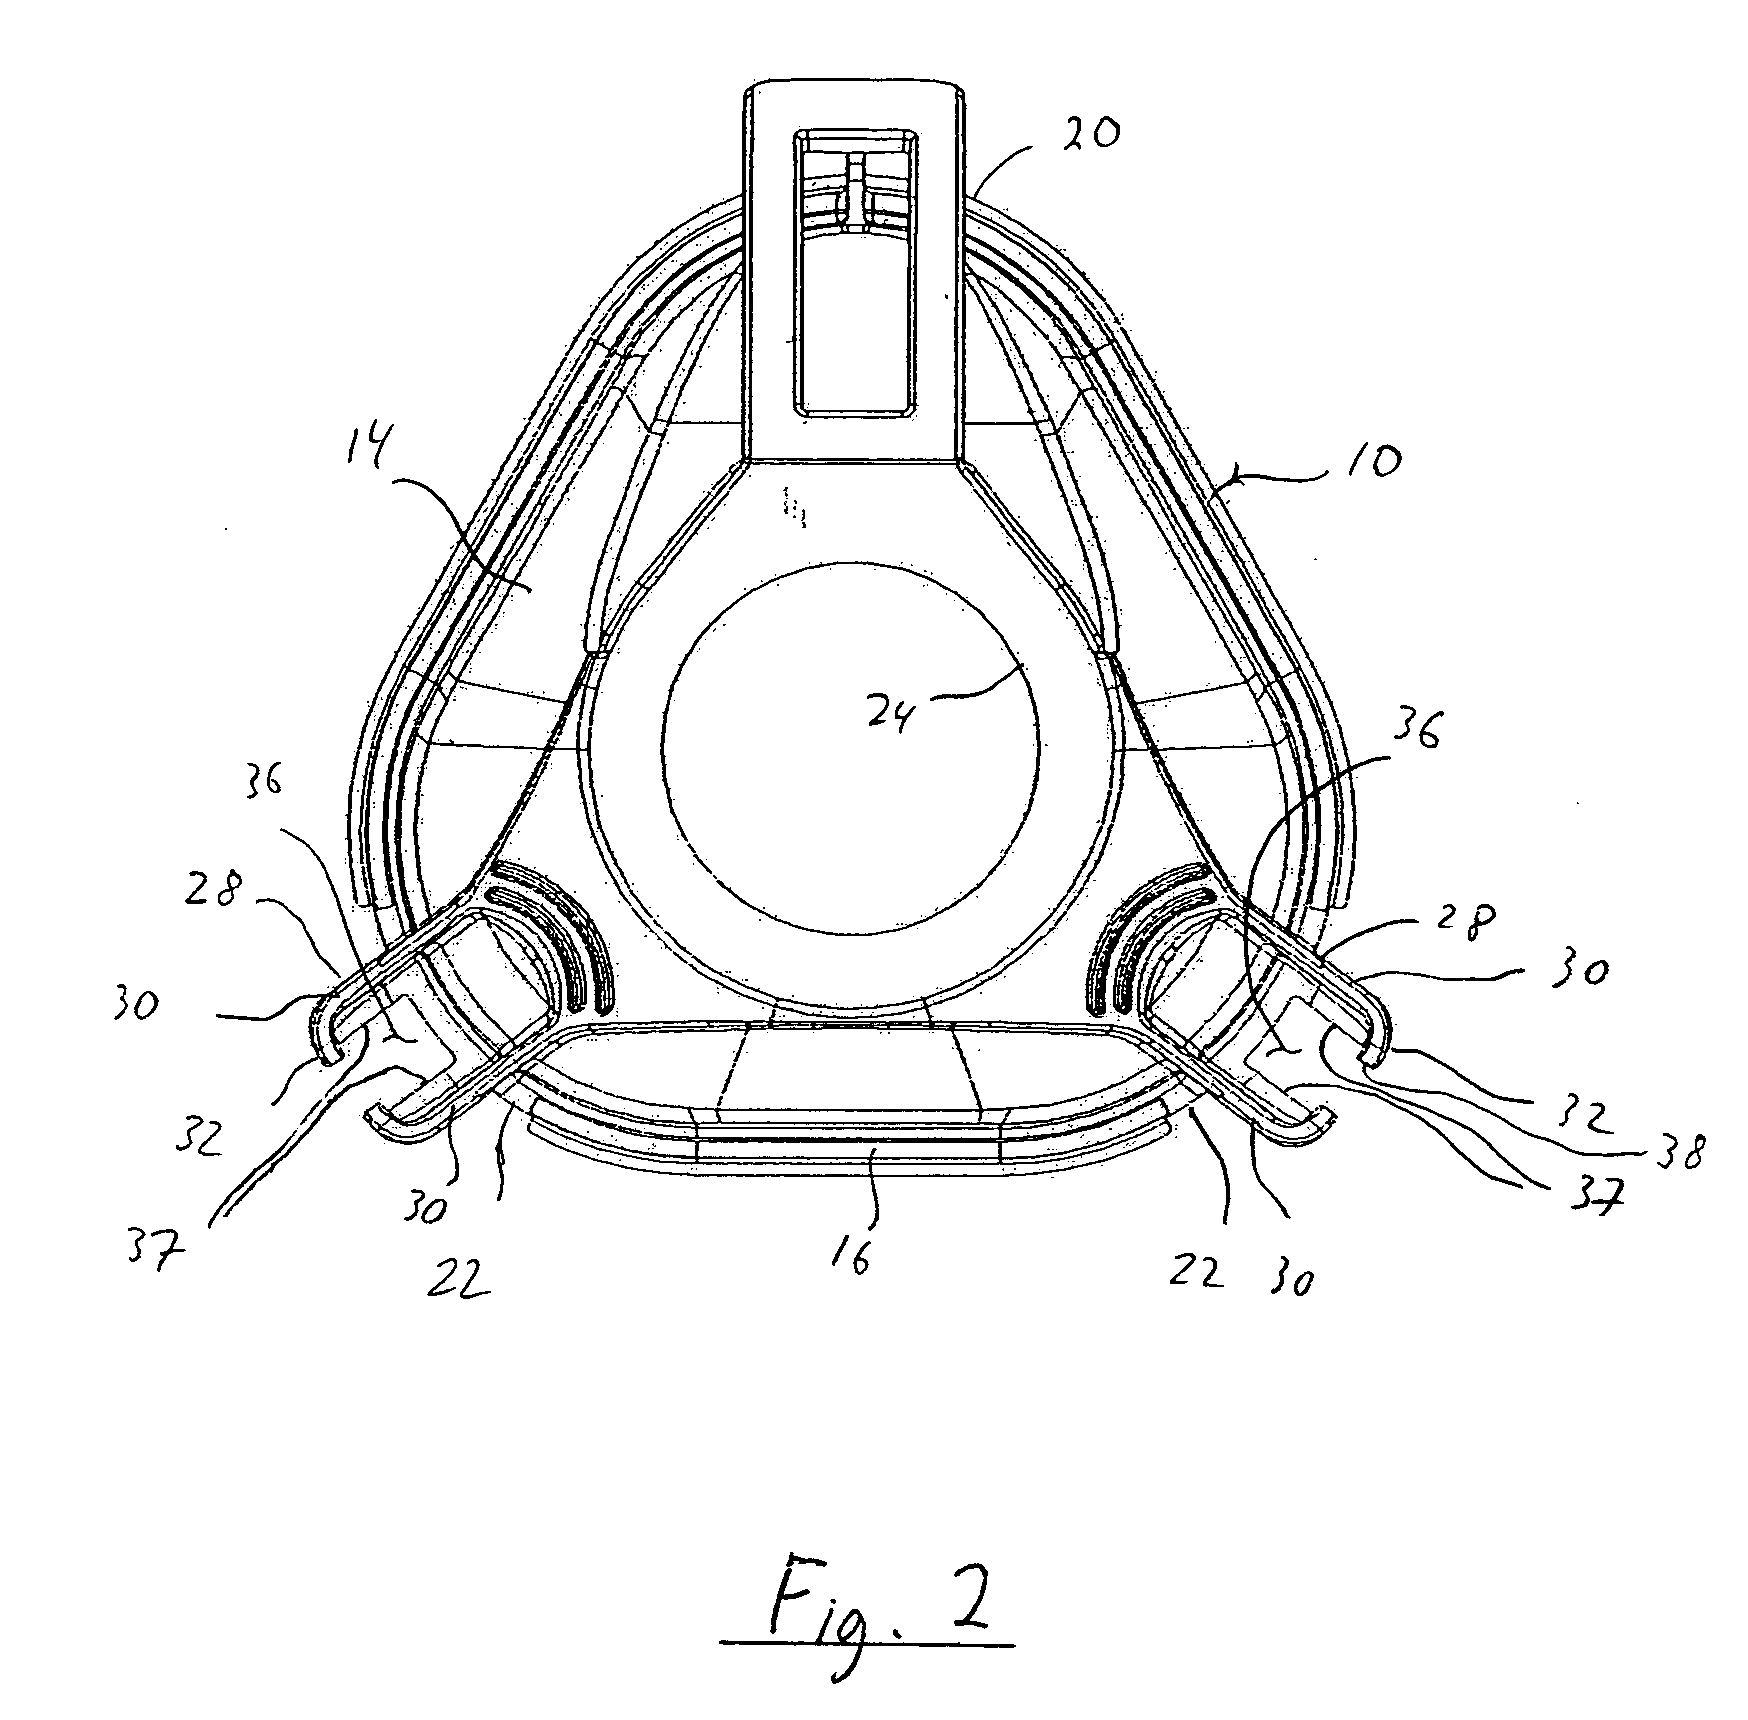 Patient interface and headgear connector